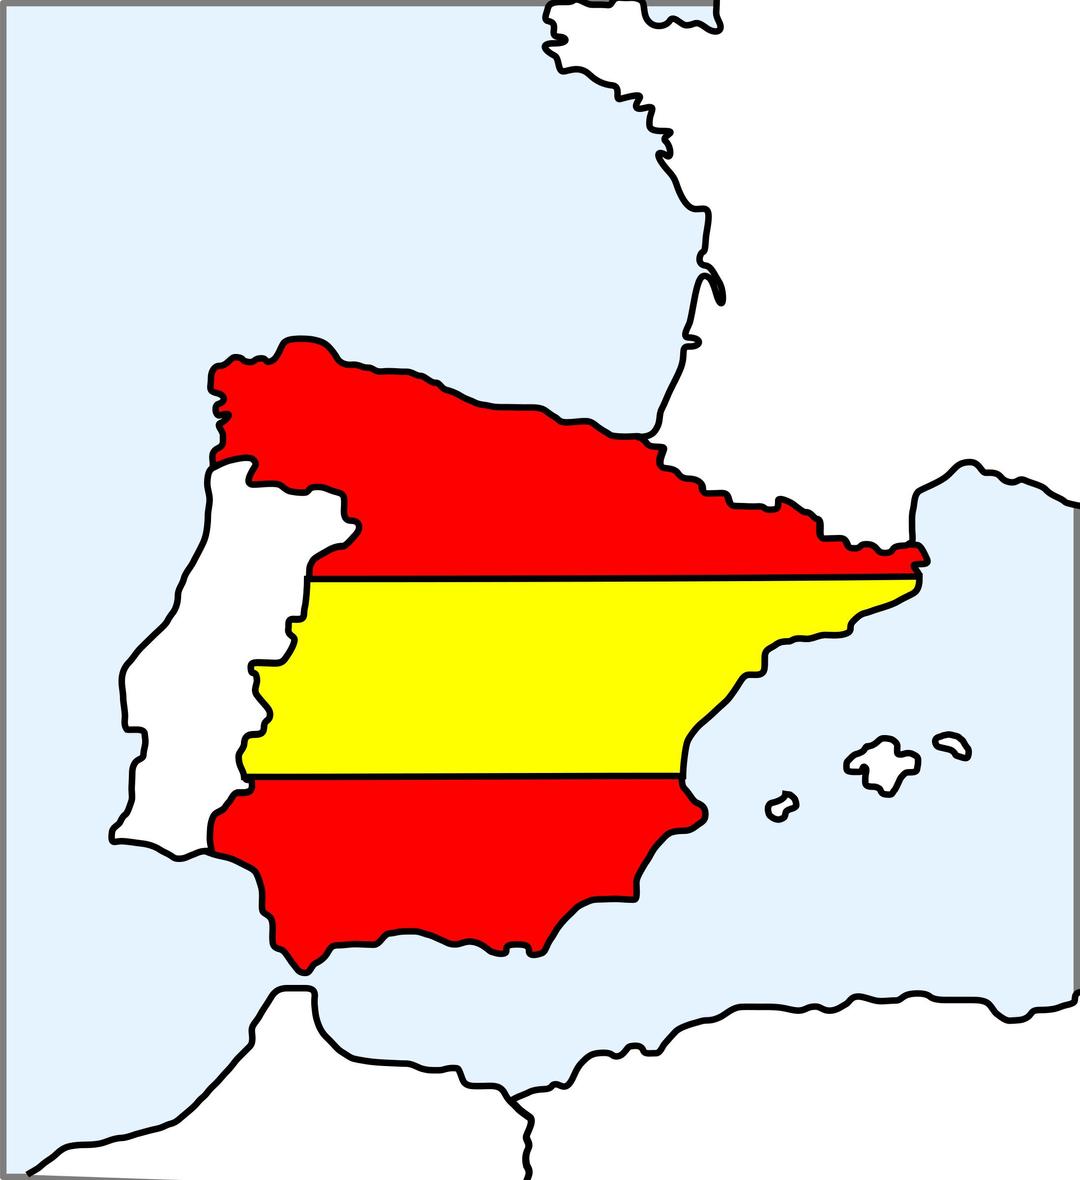 Spain (map and flag) png transparent